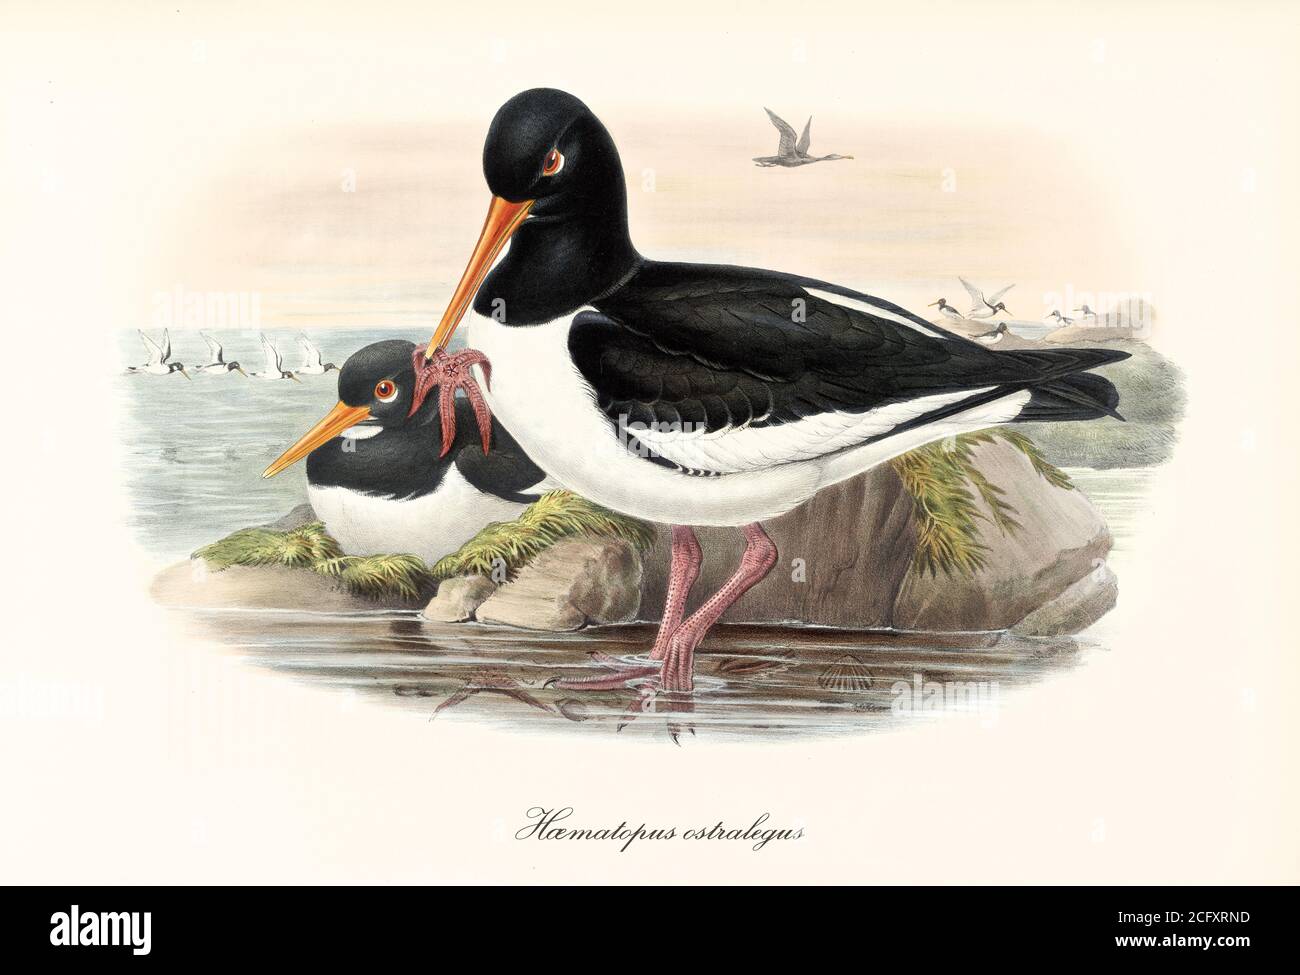 Eurasian Oystercatcher (Haematopus ostralegus) bird catching a starfish to feed keeping legs in the water. Vintage art by John Gould London 1862-1873 Stock Photo